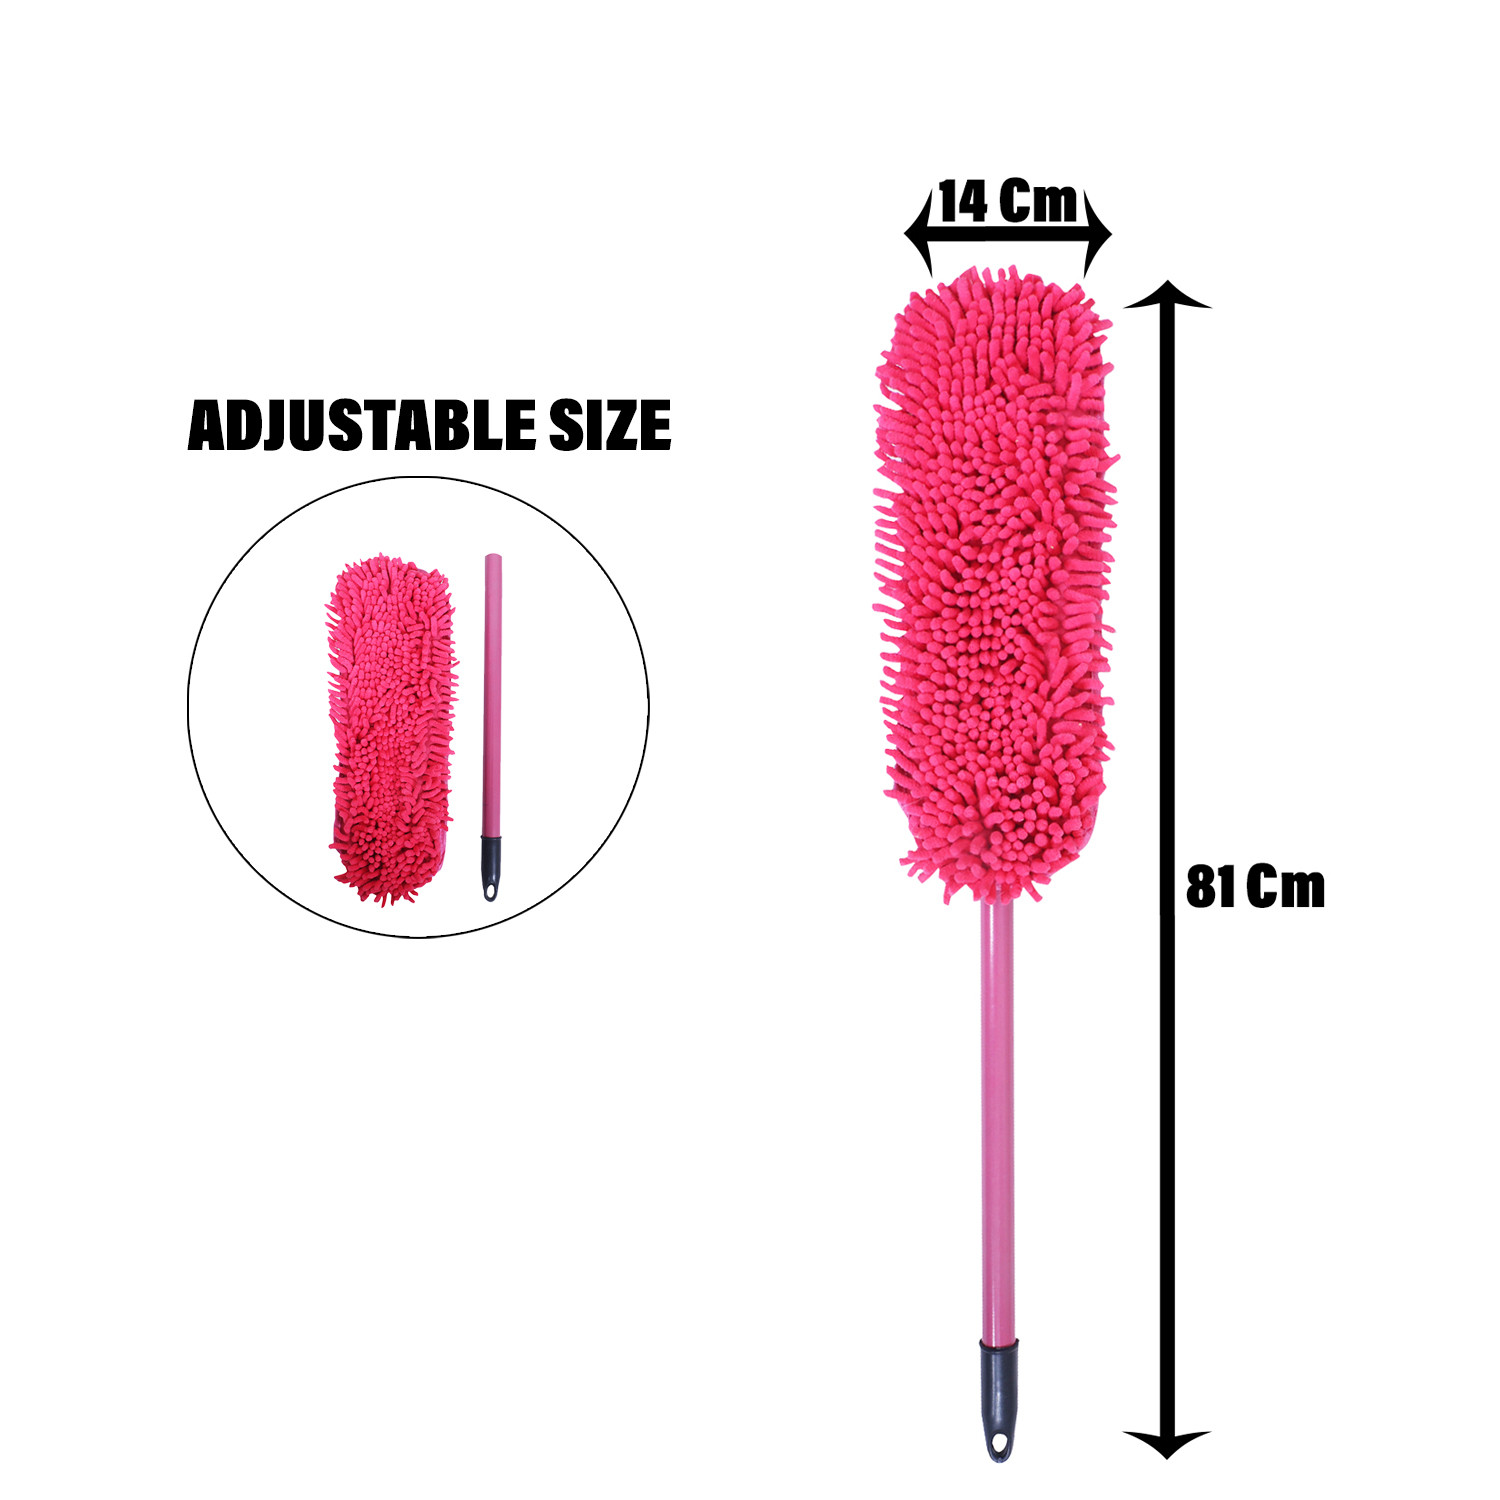 Kuber Industries Hand Duster|Microfiber Washable Cleaning Brush|Stainless Steel Detachable Handle Dusting Brush For Car|House Cleaning (Pink)